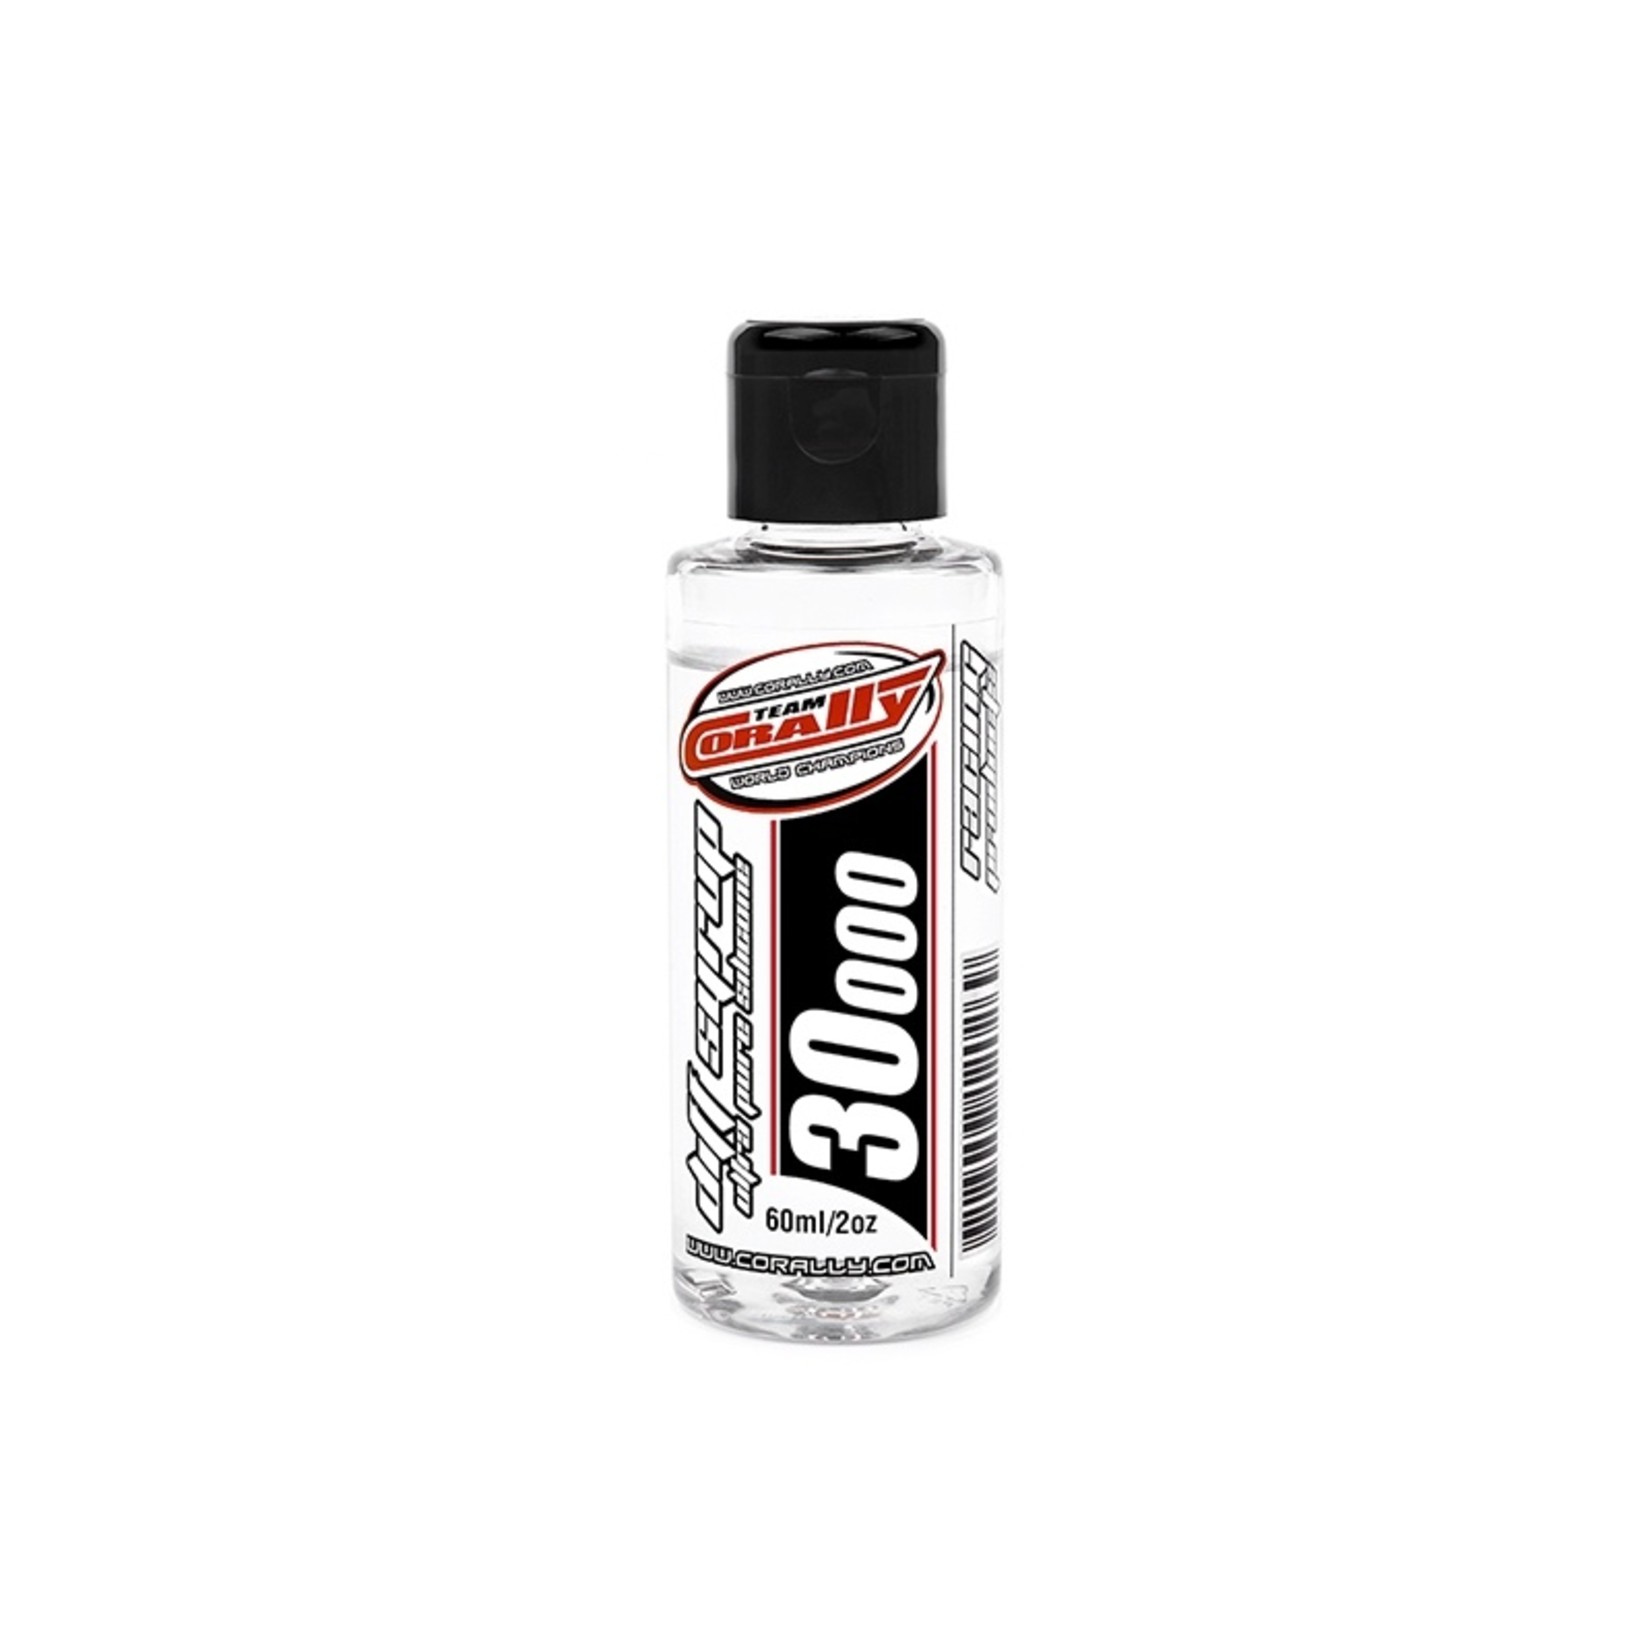 Corally (Team Corally) Ultra Pure Silicone Diff Syrup - 30000 CPS - 60ml